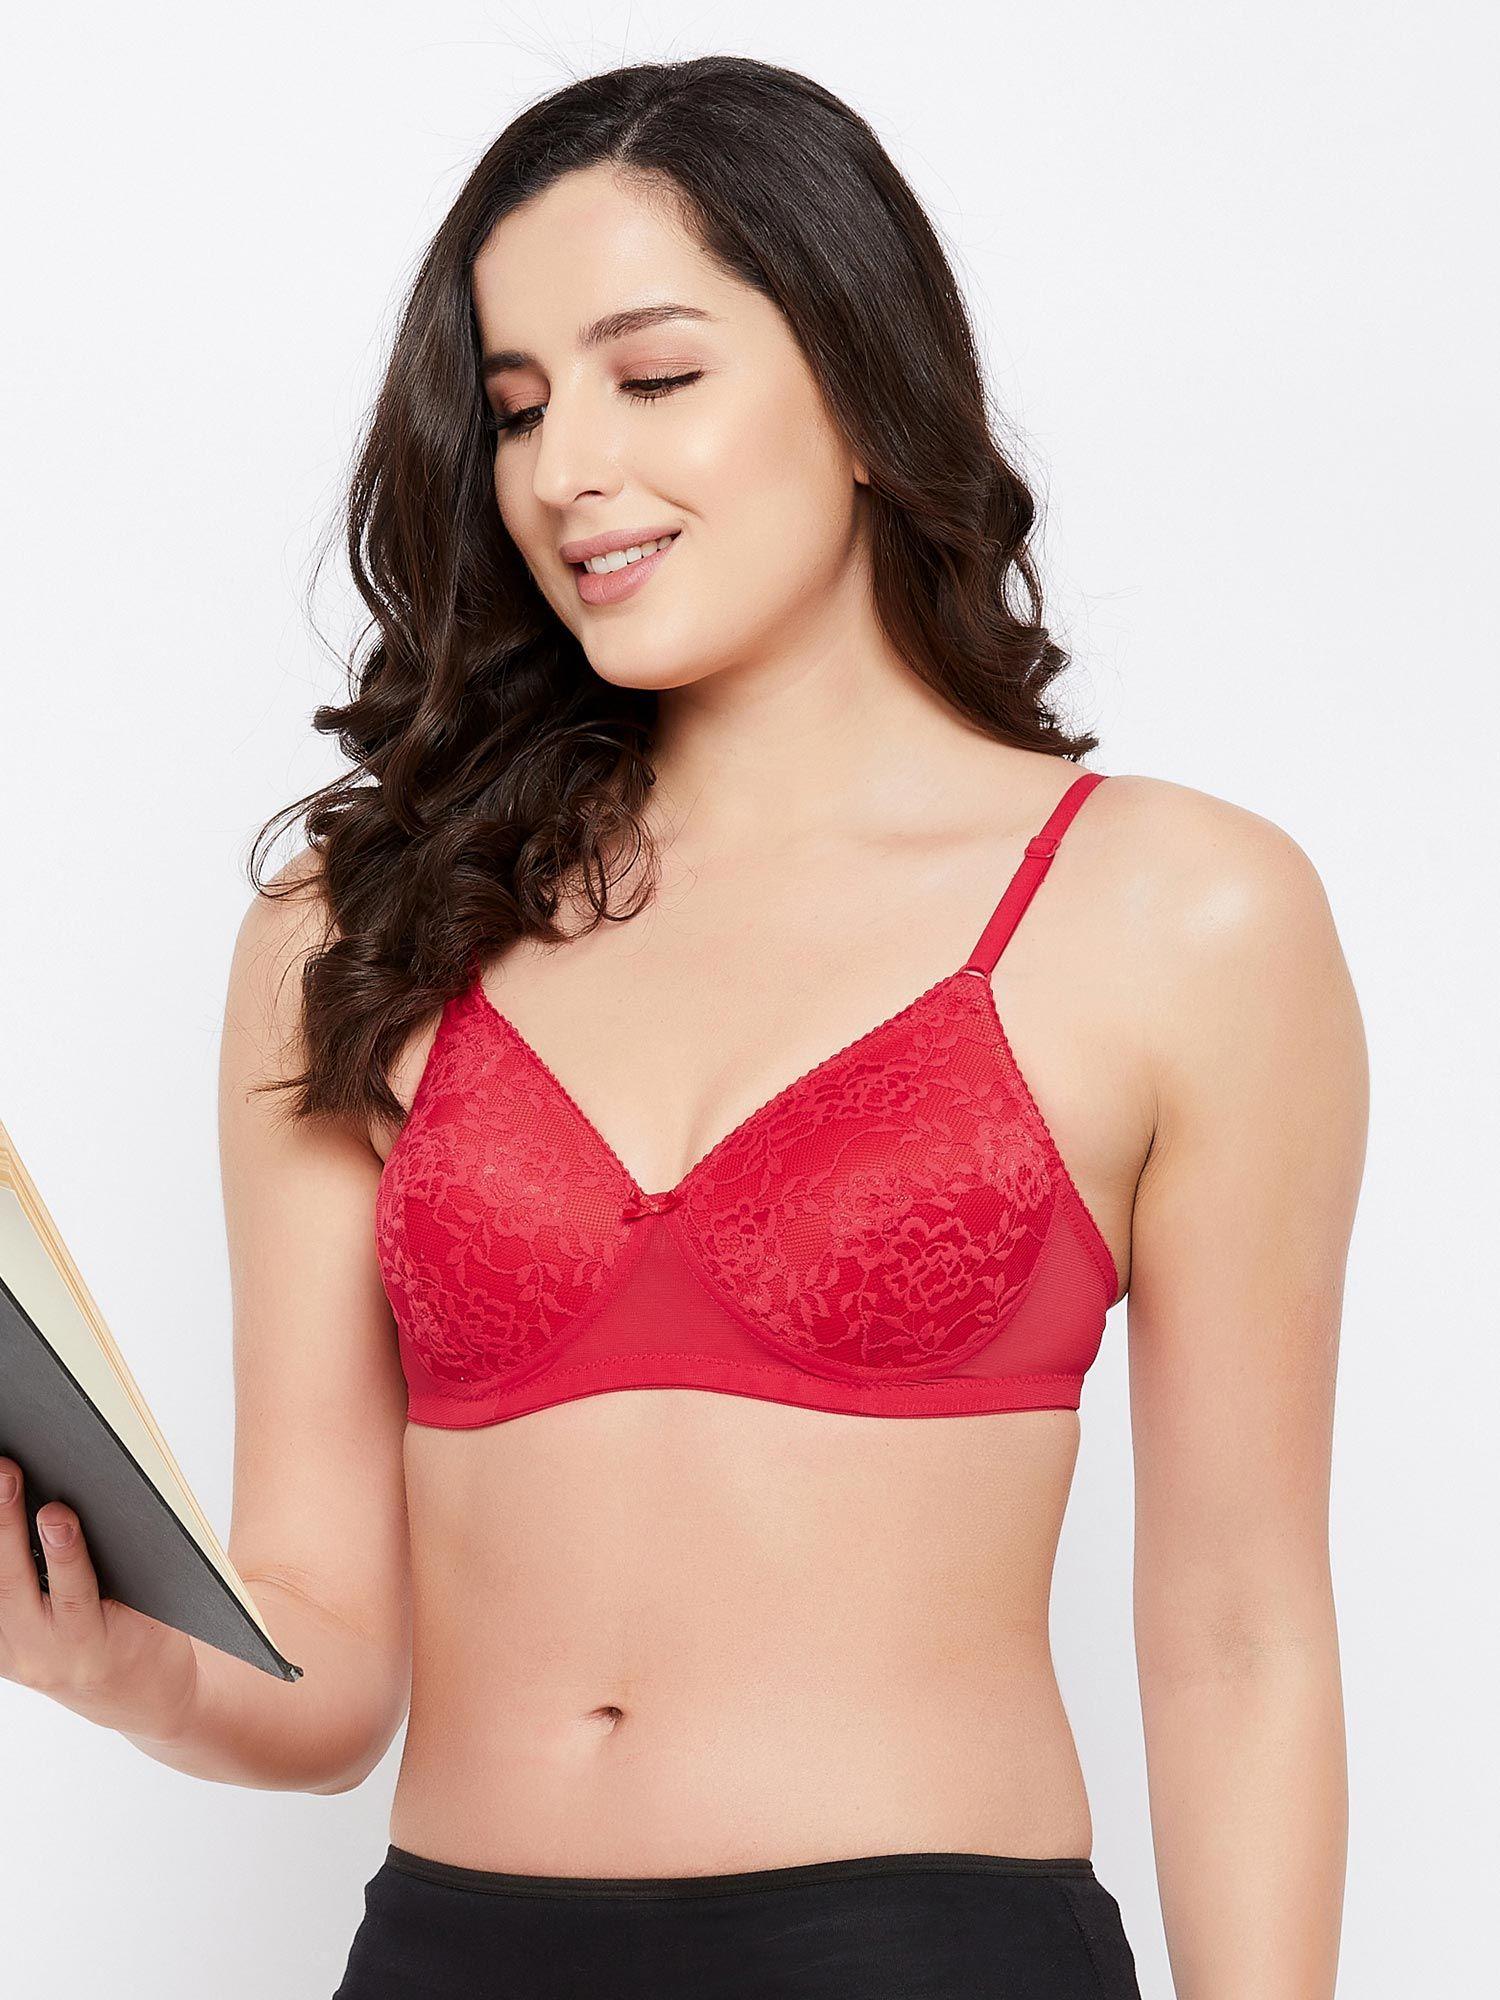 padded non-wired full cup t-shirt bra in red - lace